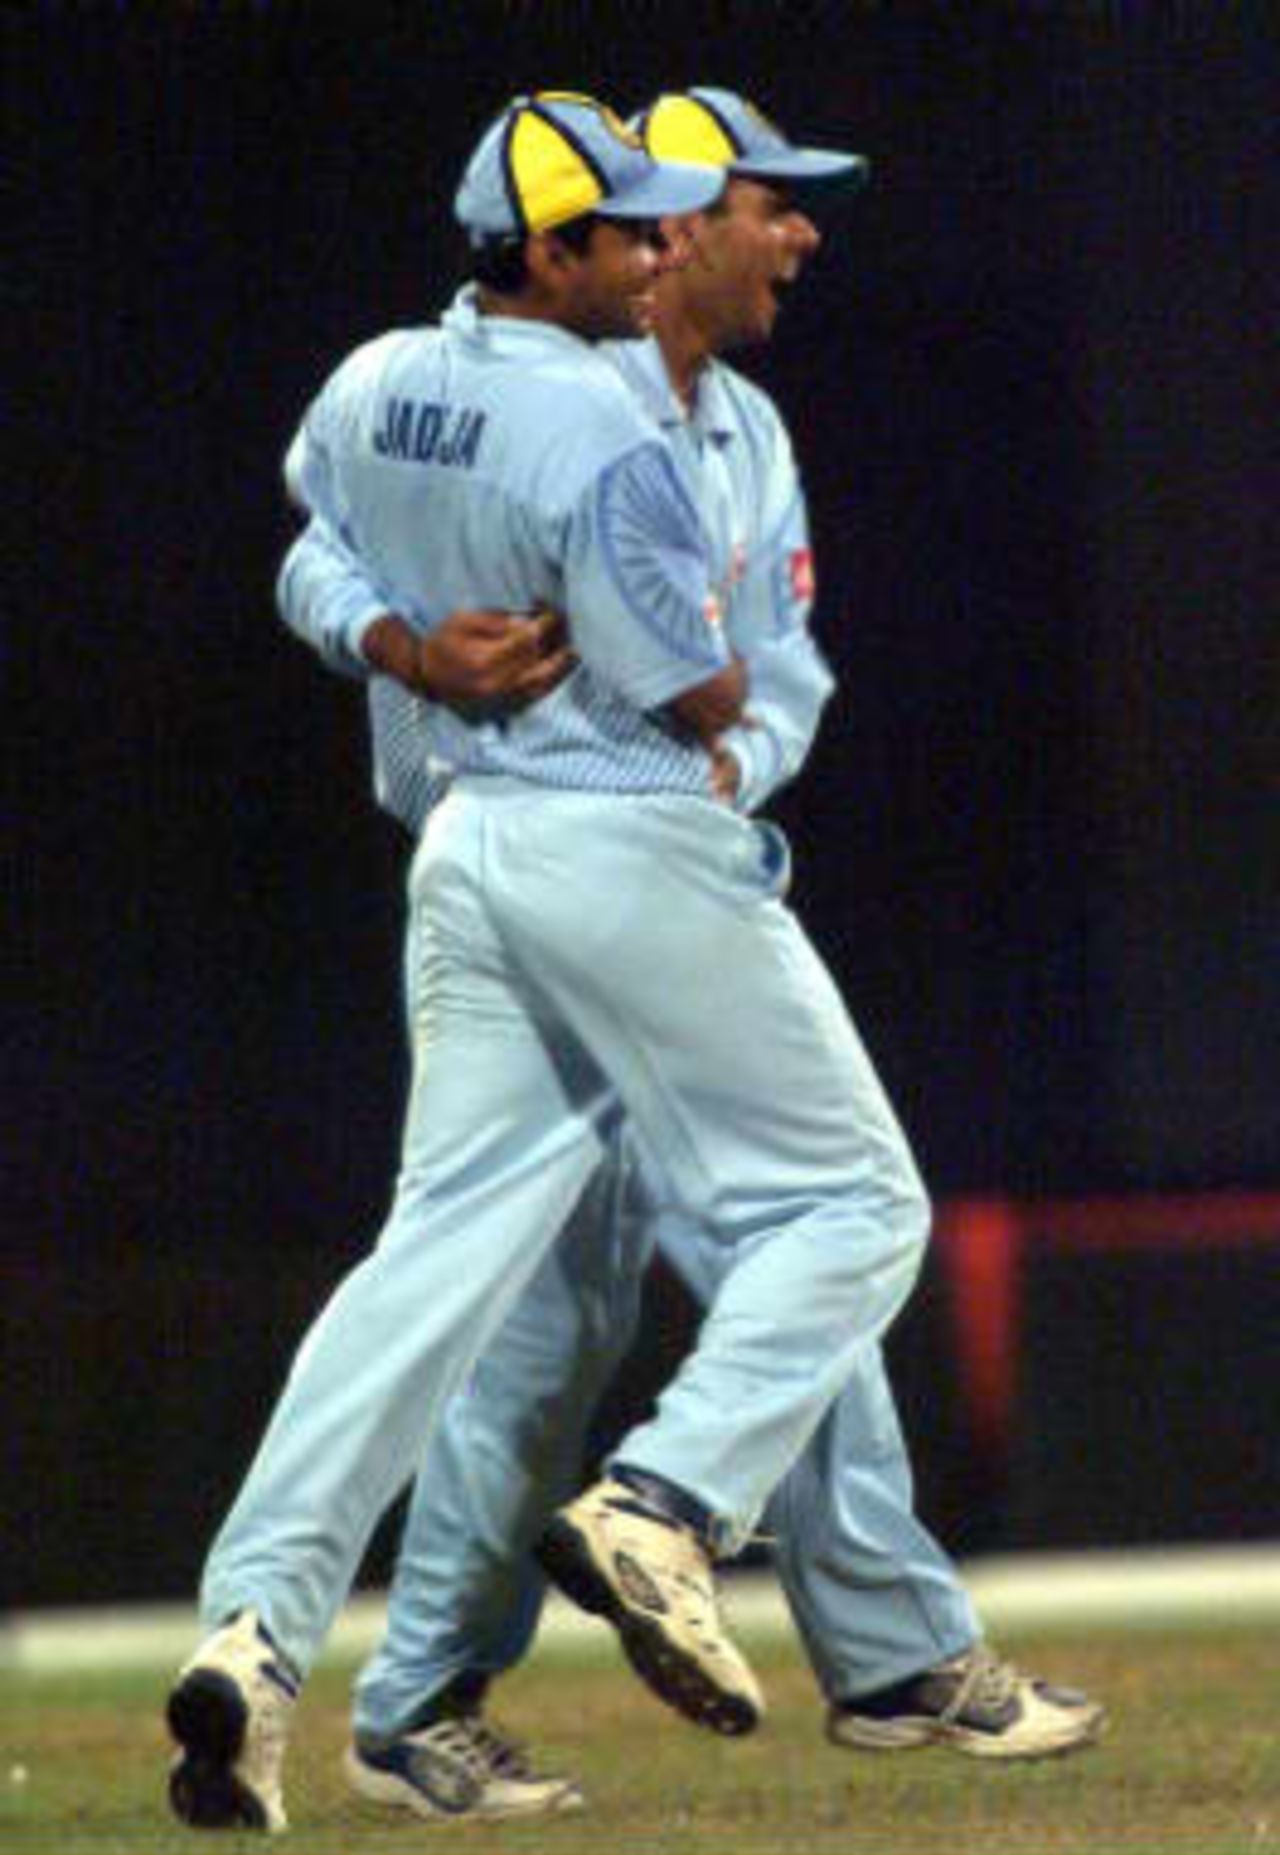 Indians Ajay Jadeja and Rahul Dravid celebrate the run-out of Ian Austin in the 3rd match of the Coca Cola Championships being played in Sharjah on 9th April 1999